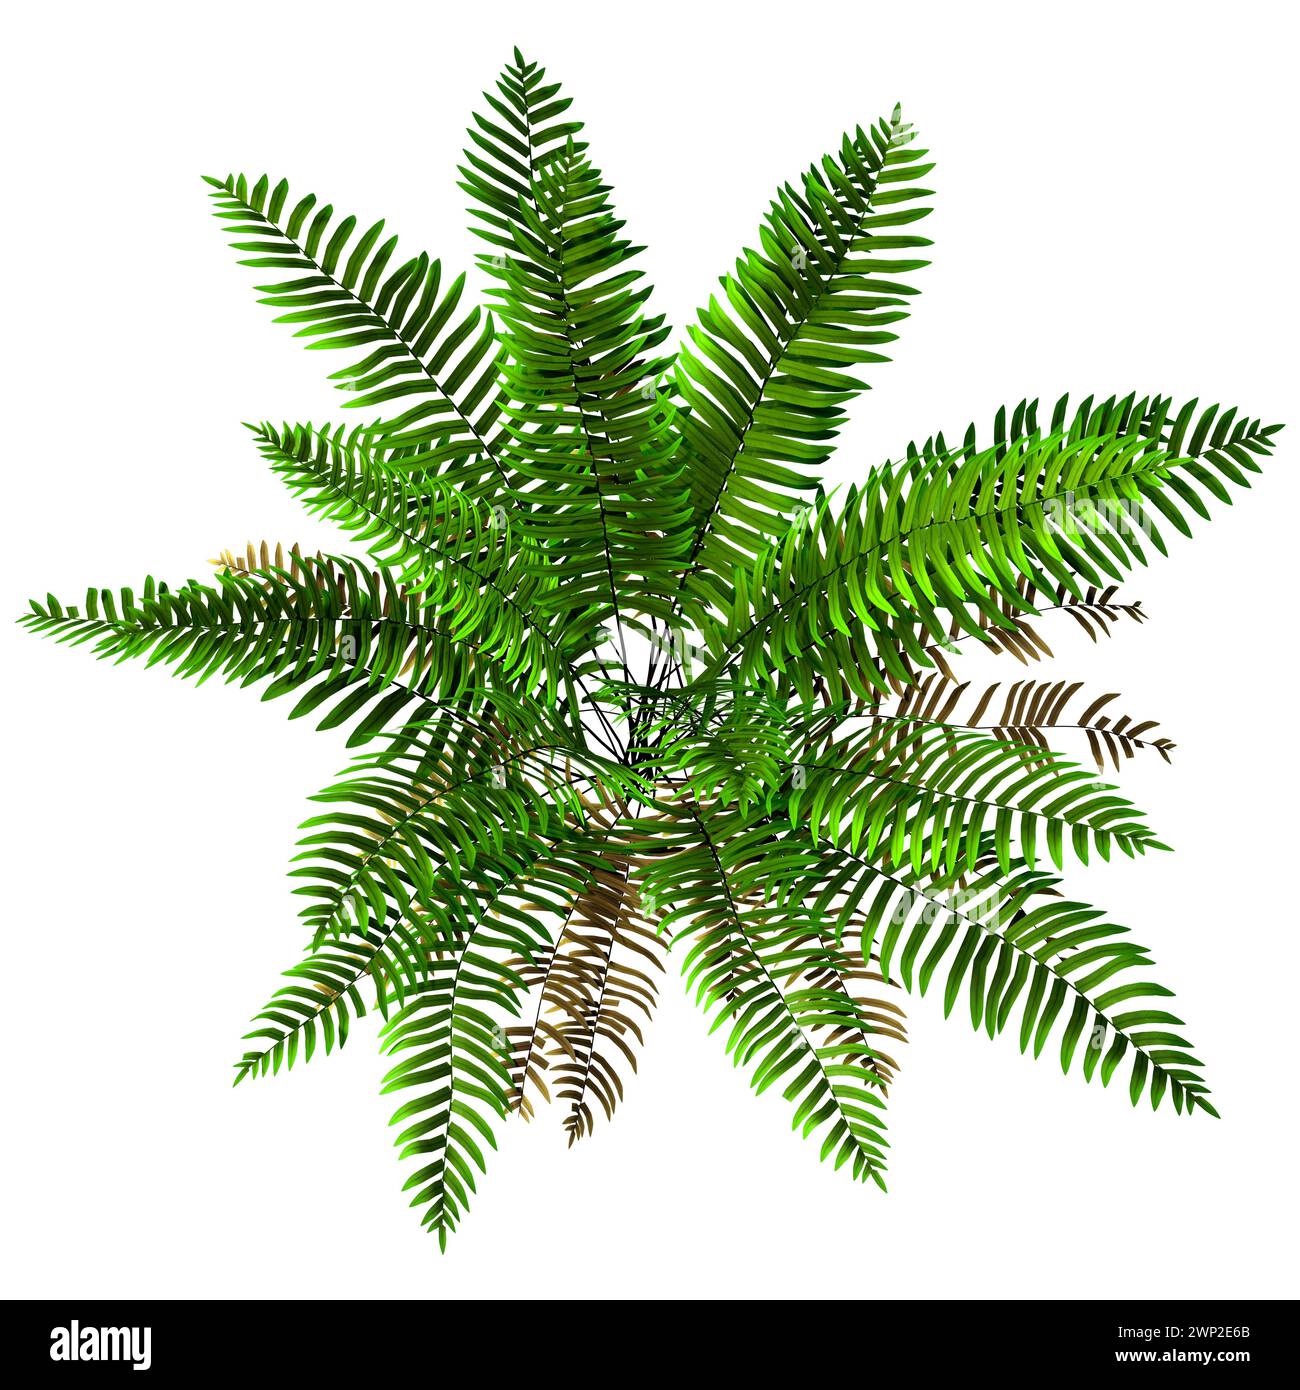 3D rendering of a green sword or Boston fern plant or Nephrolepis exaltata isolated on white background Stock Photo